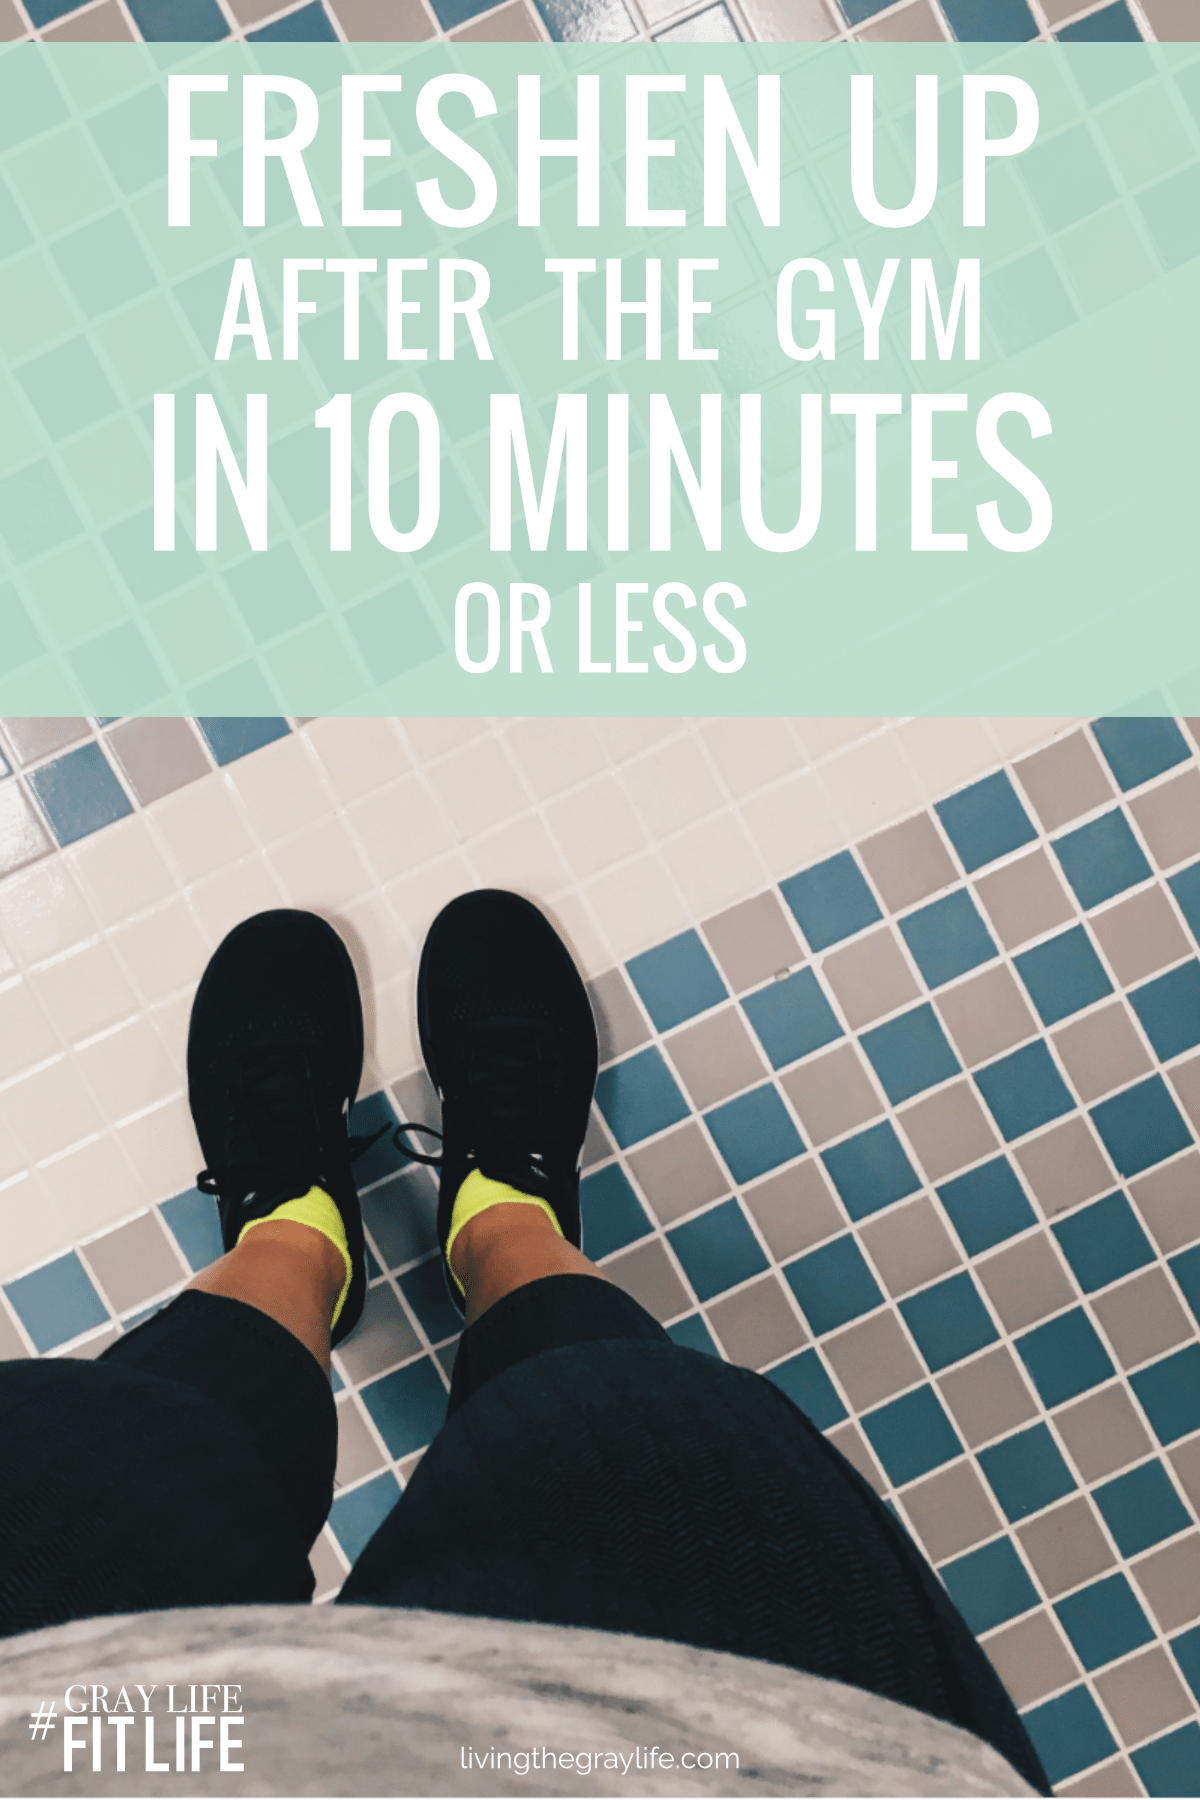 Freshen Up after the Gym in 10 Minutes or Less